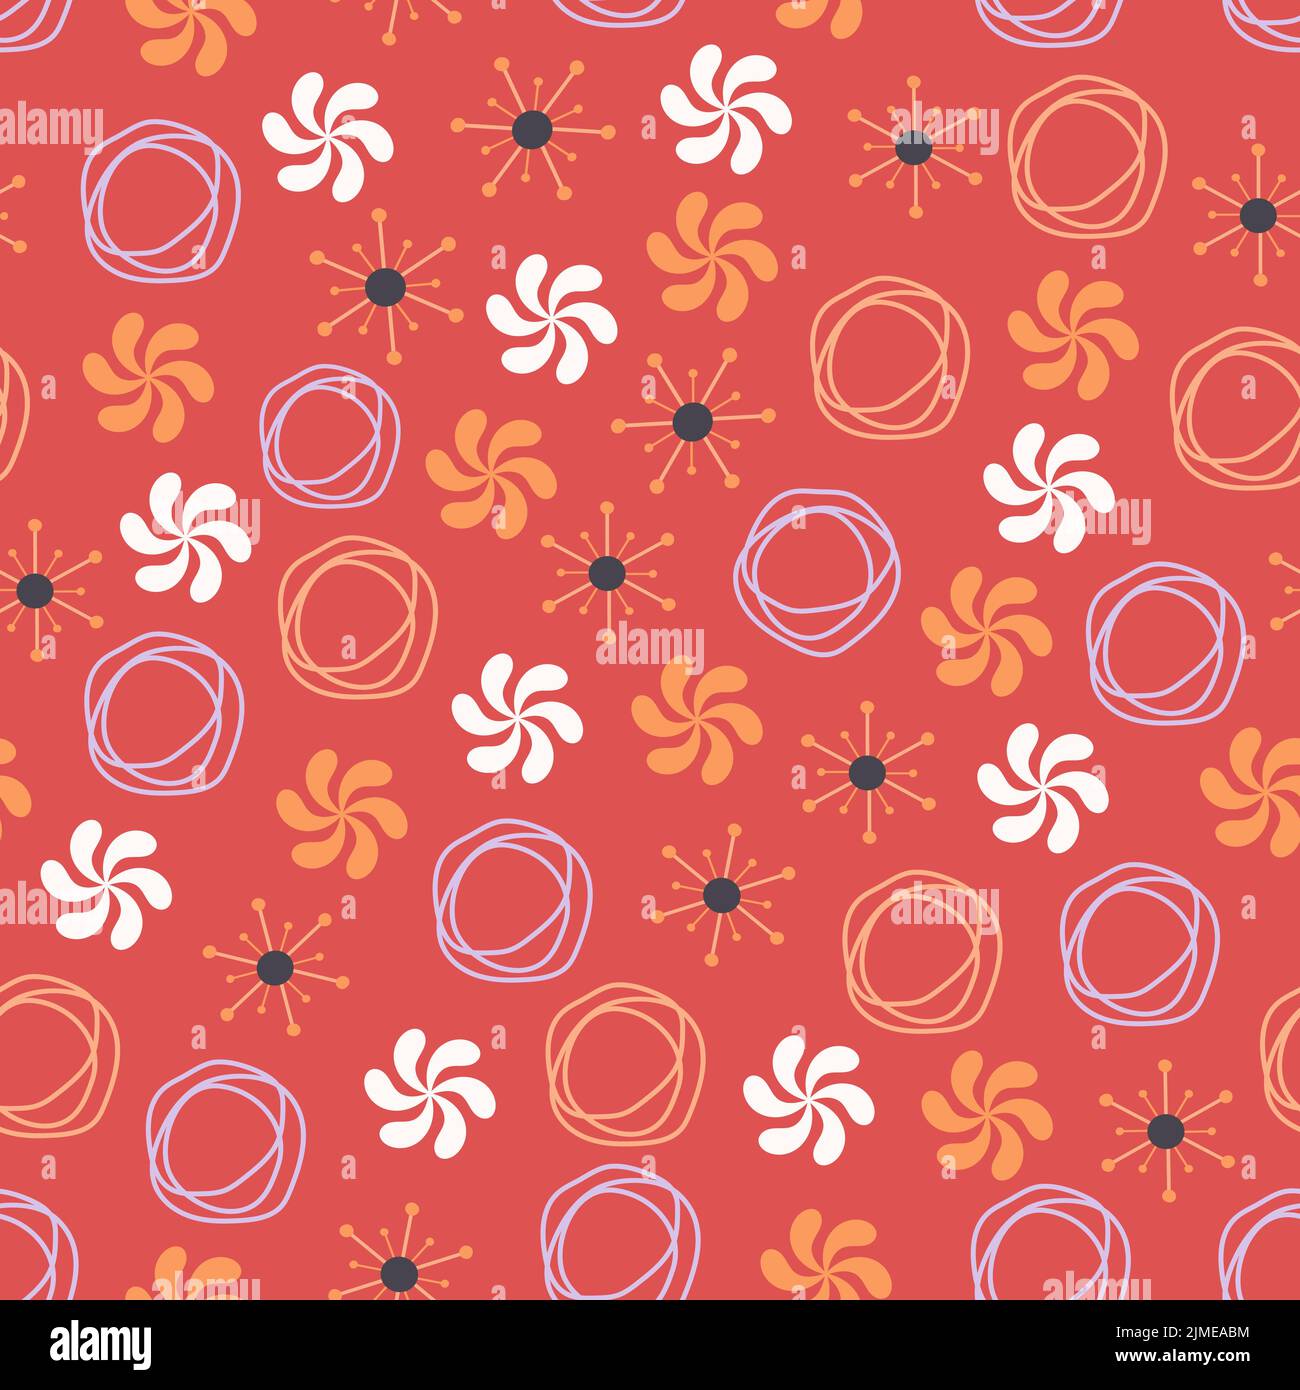 Stylish fashionable vector seamless ornamental pattern design. Modern repeating floral texture. Abstract shapes background for textile and printing Stock Vector